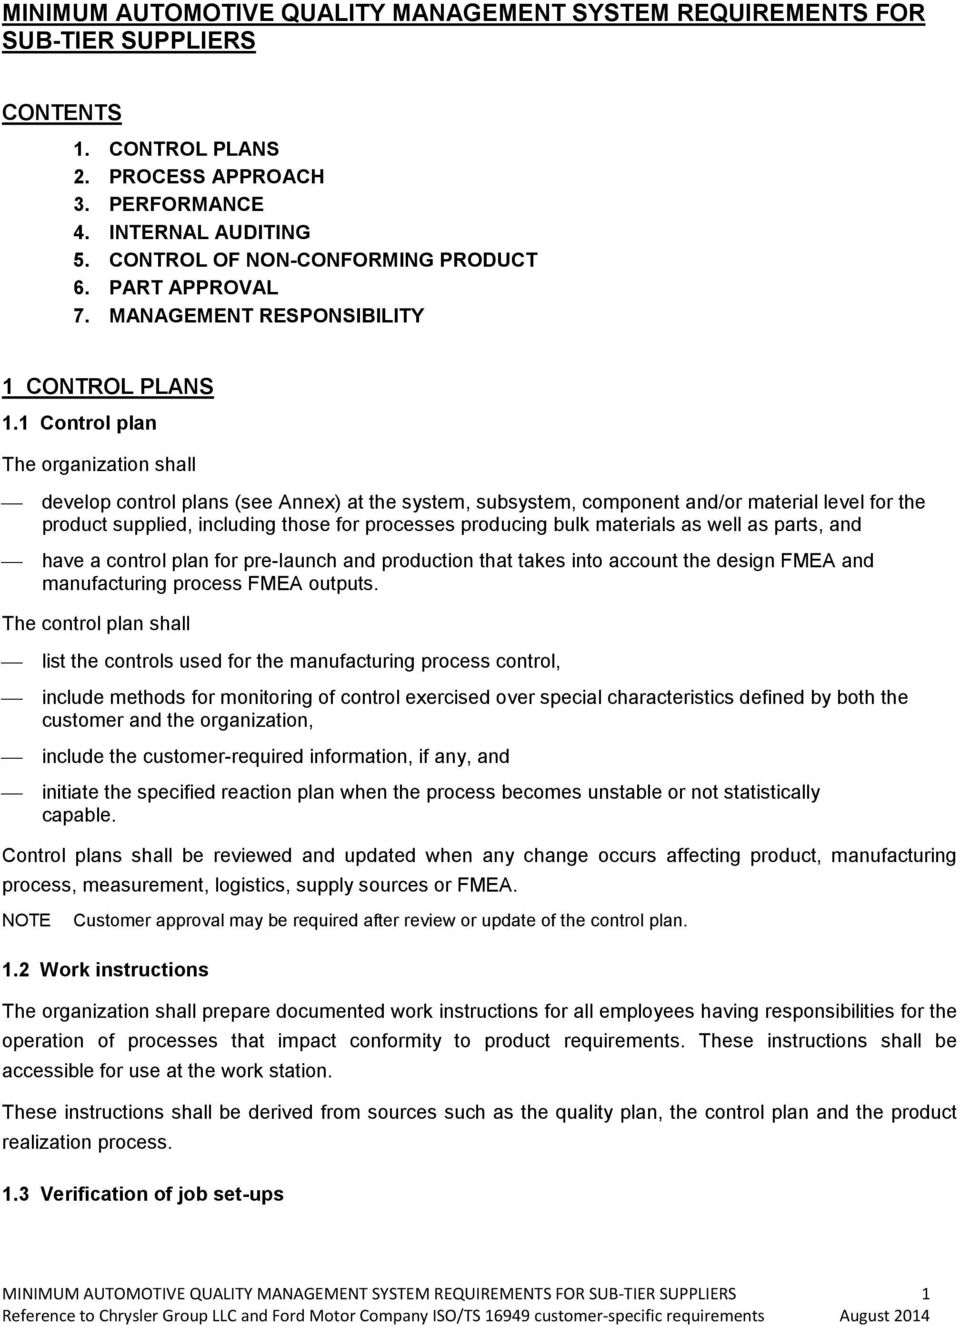 1 Control plan The organization shall develop control plans (see Annex) at the system, subsystem, component and/or material level for the product supplied, including those for processes producing